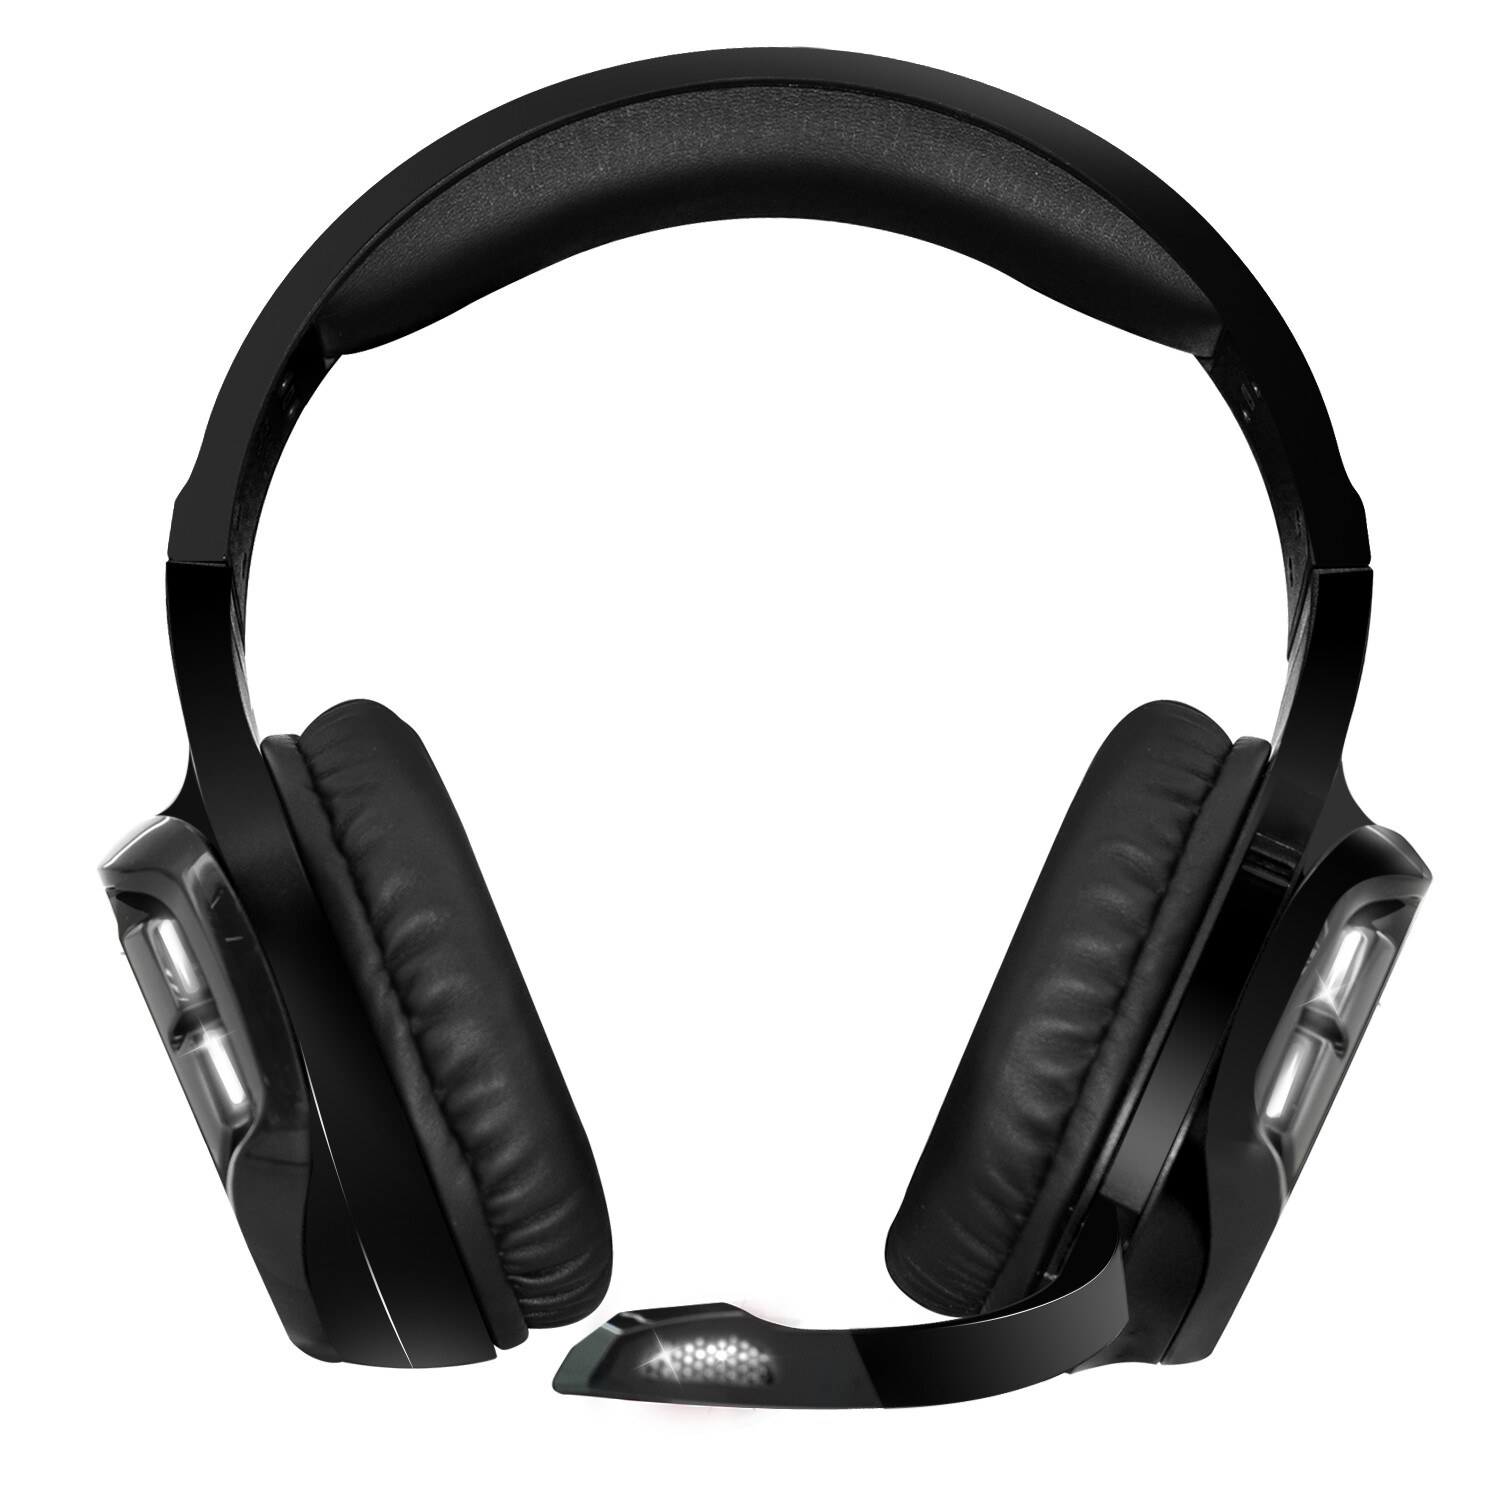 Casque Gamer 7.1 sans Fil XPERT-XH1100 pour PS4 / PS3 / Xbox One/Switch/PC